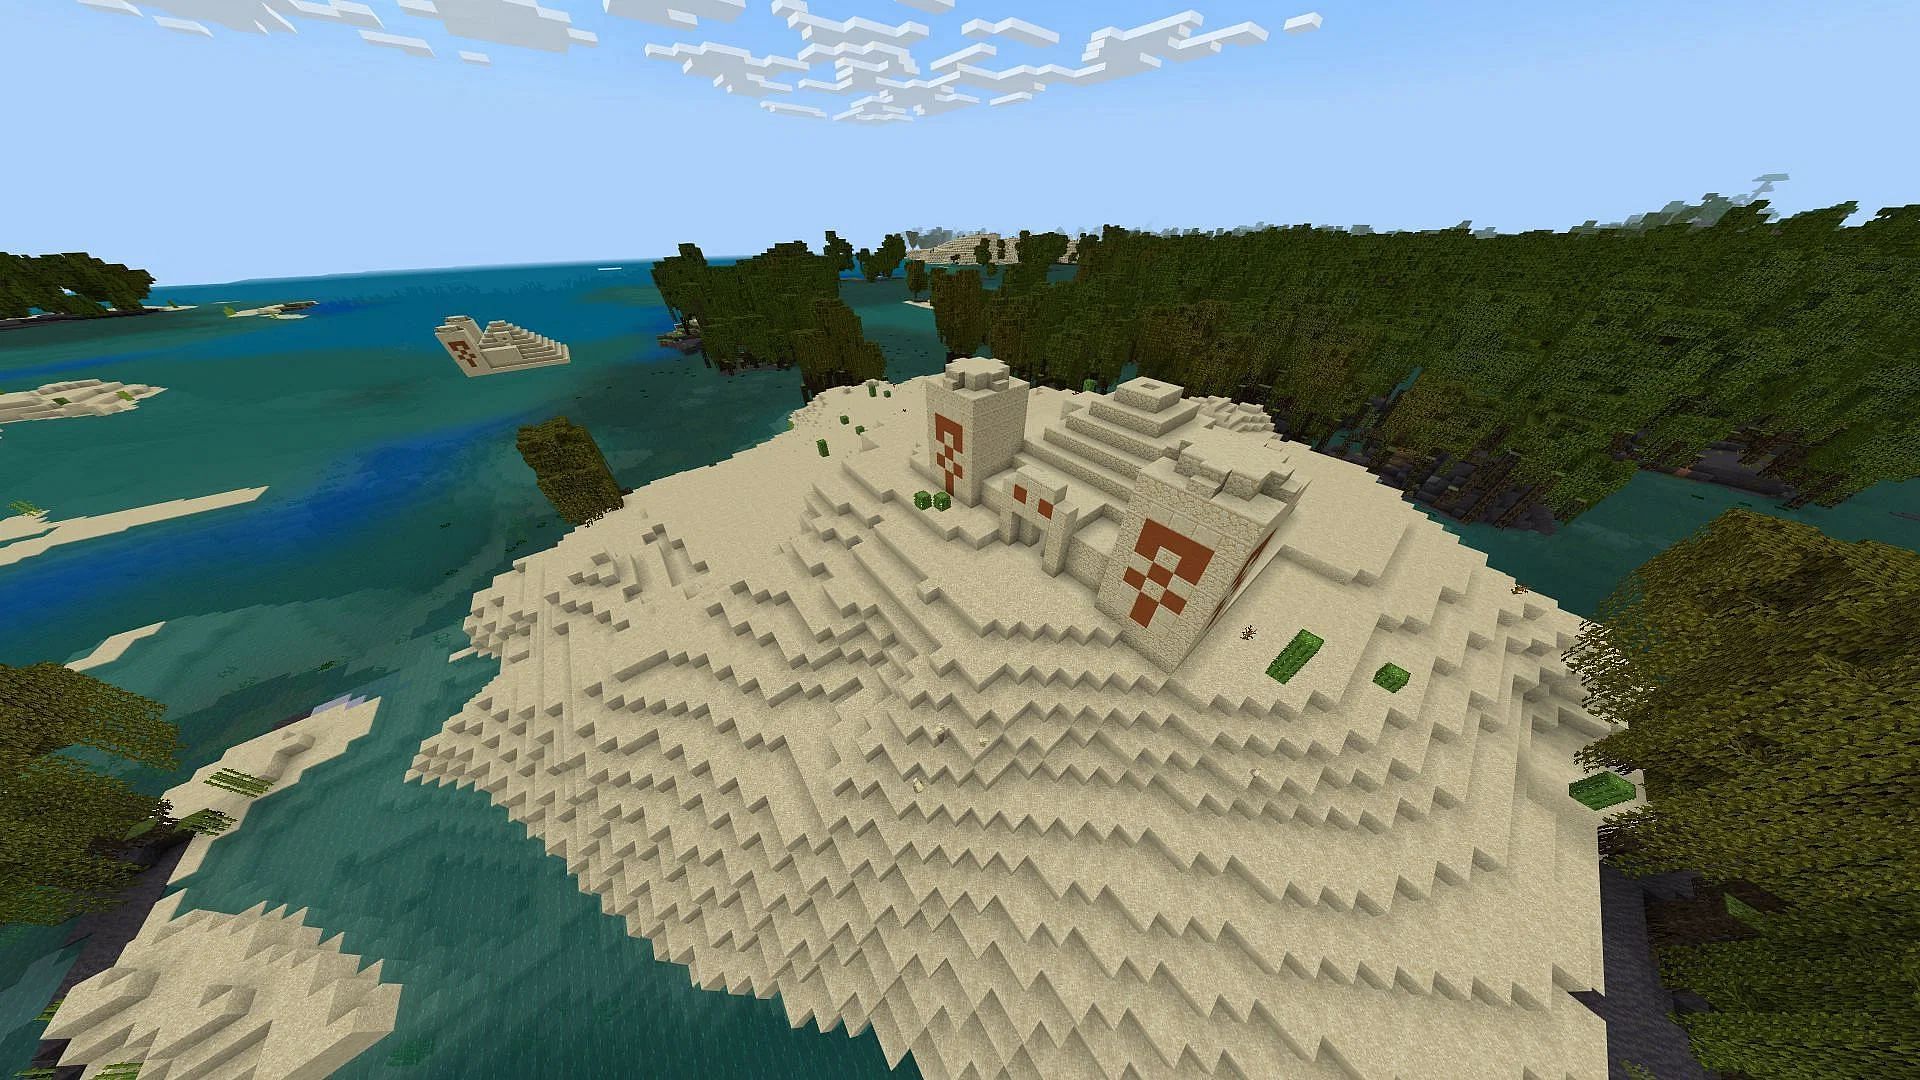 The pyramids in this Minecraft Bedrock seed rest among plenty of mangrove swampland (Image via Mojang)